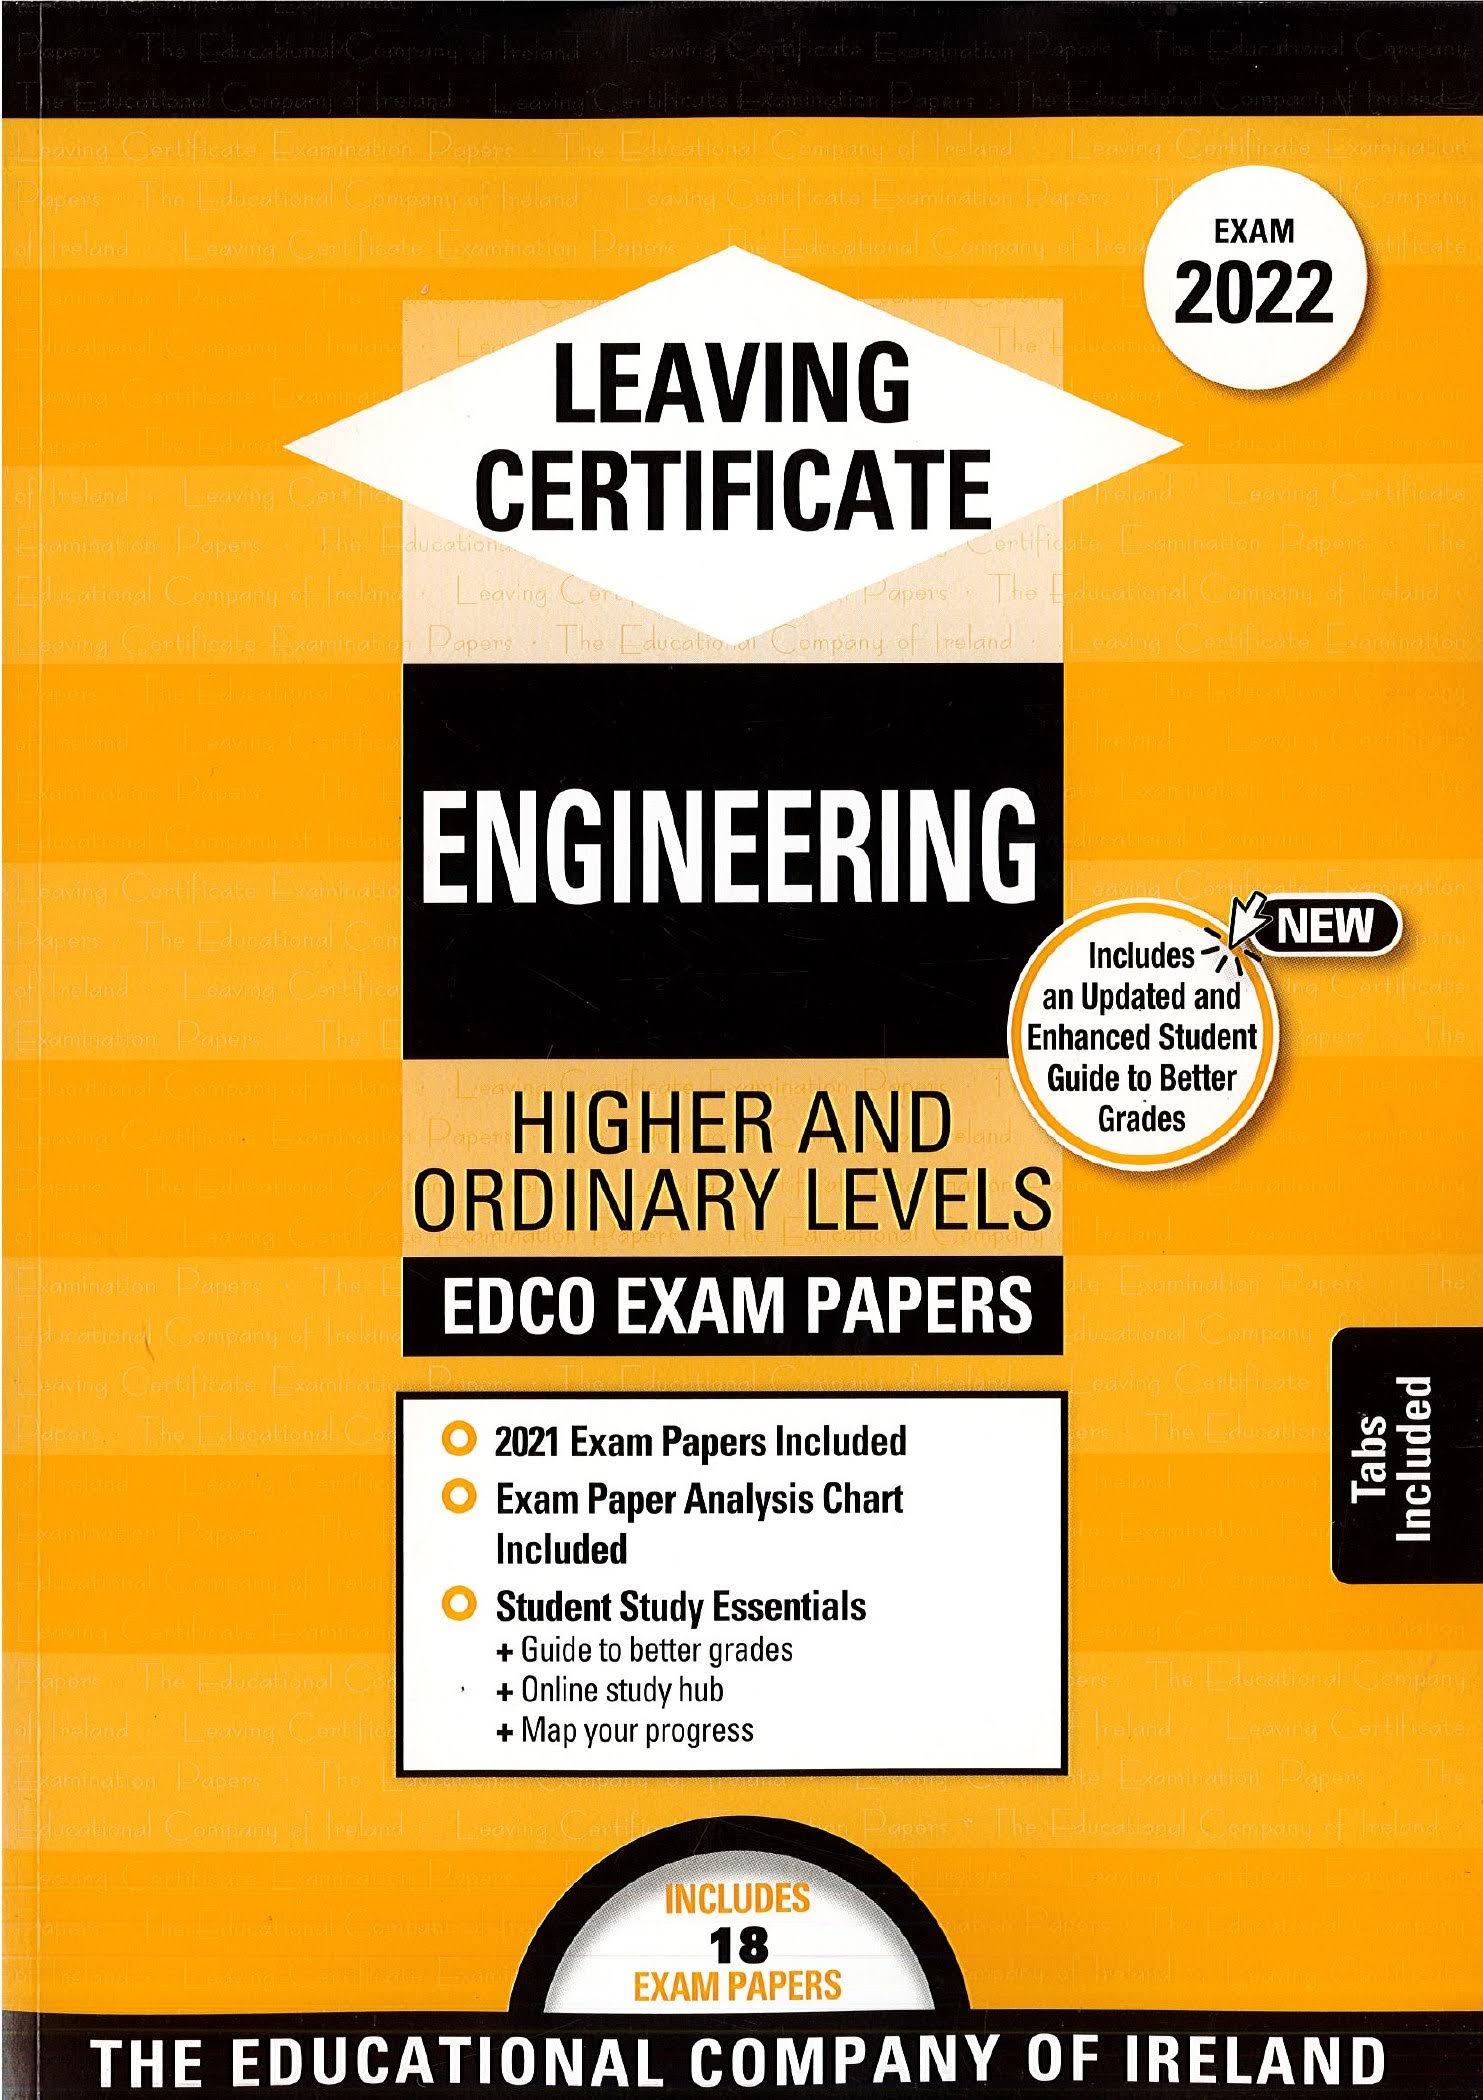 Leaving Certificate Engineering Higher & Ordinary Levels Exam Papers